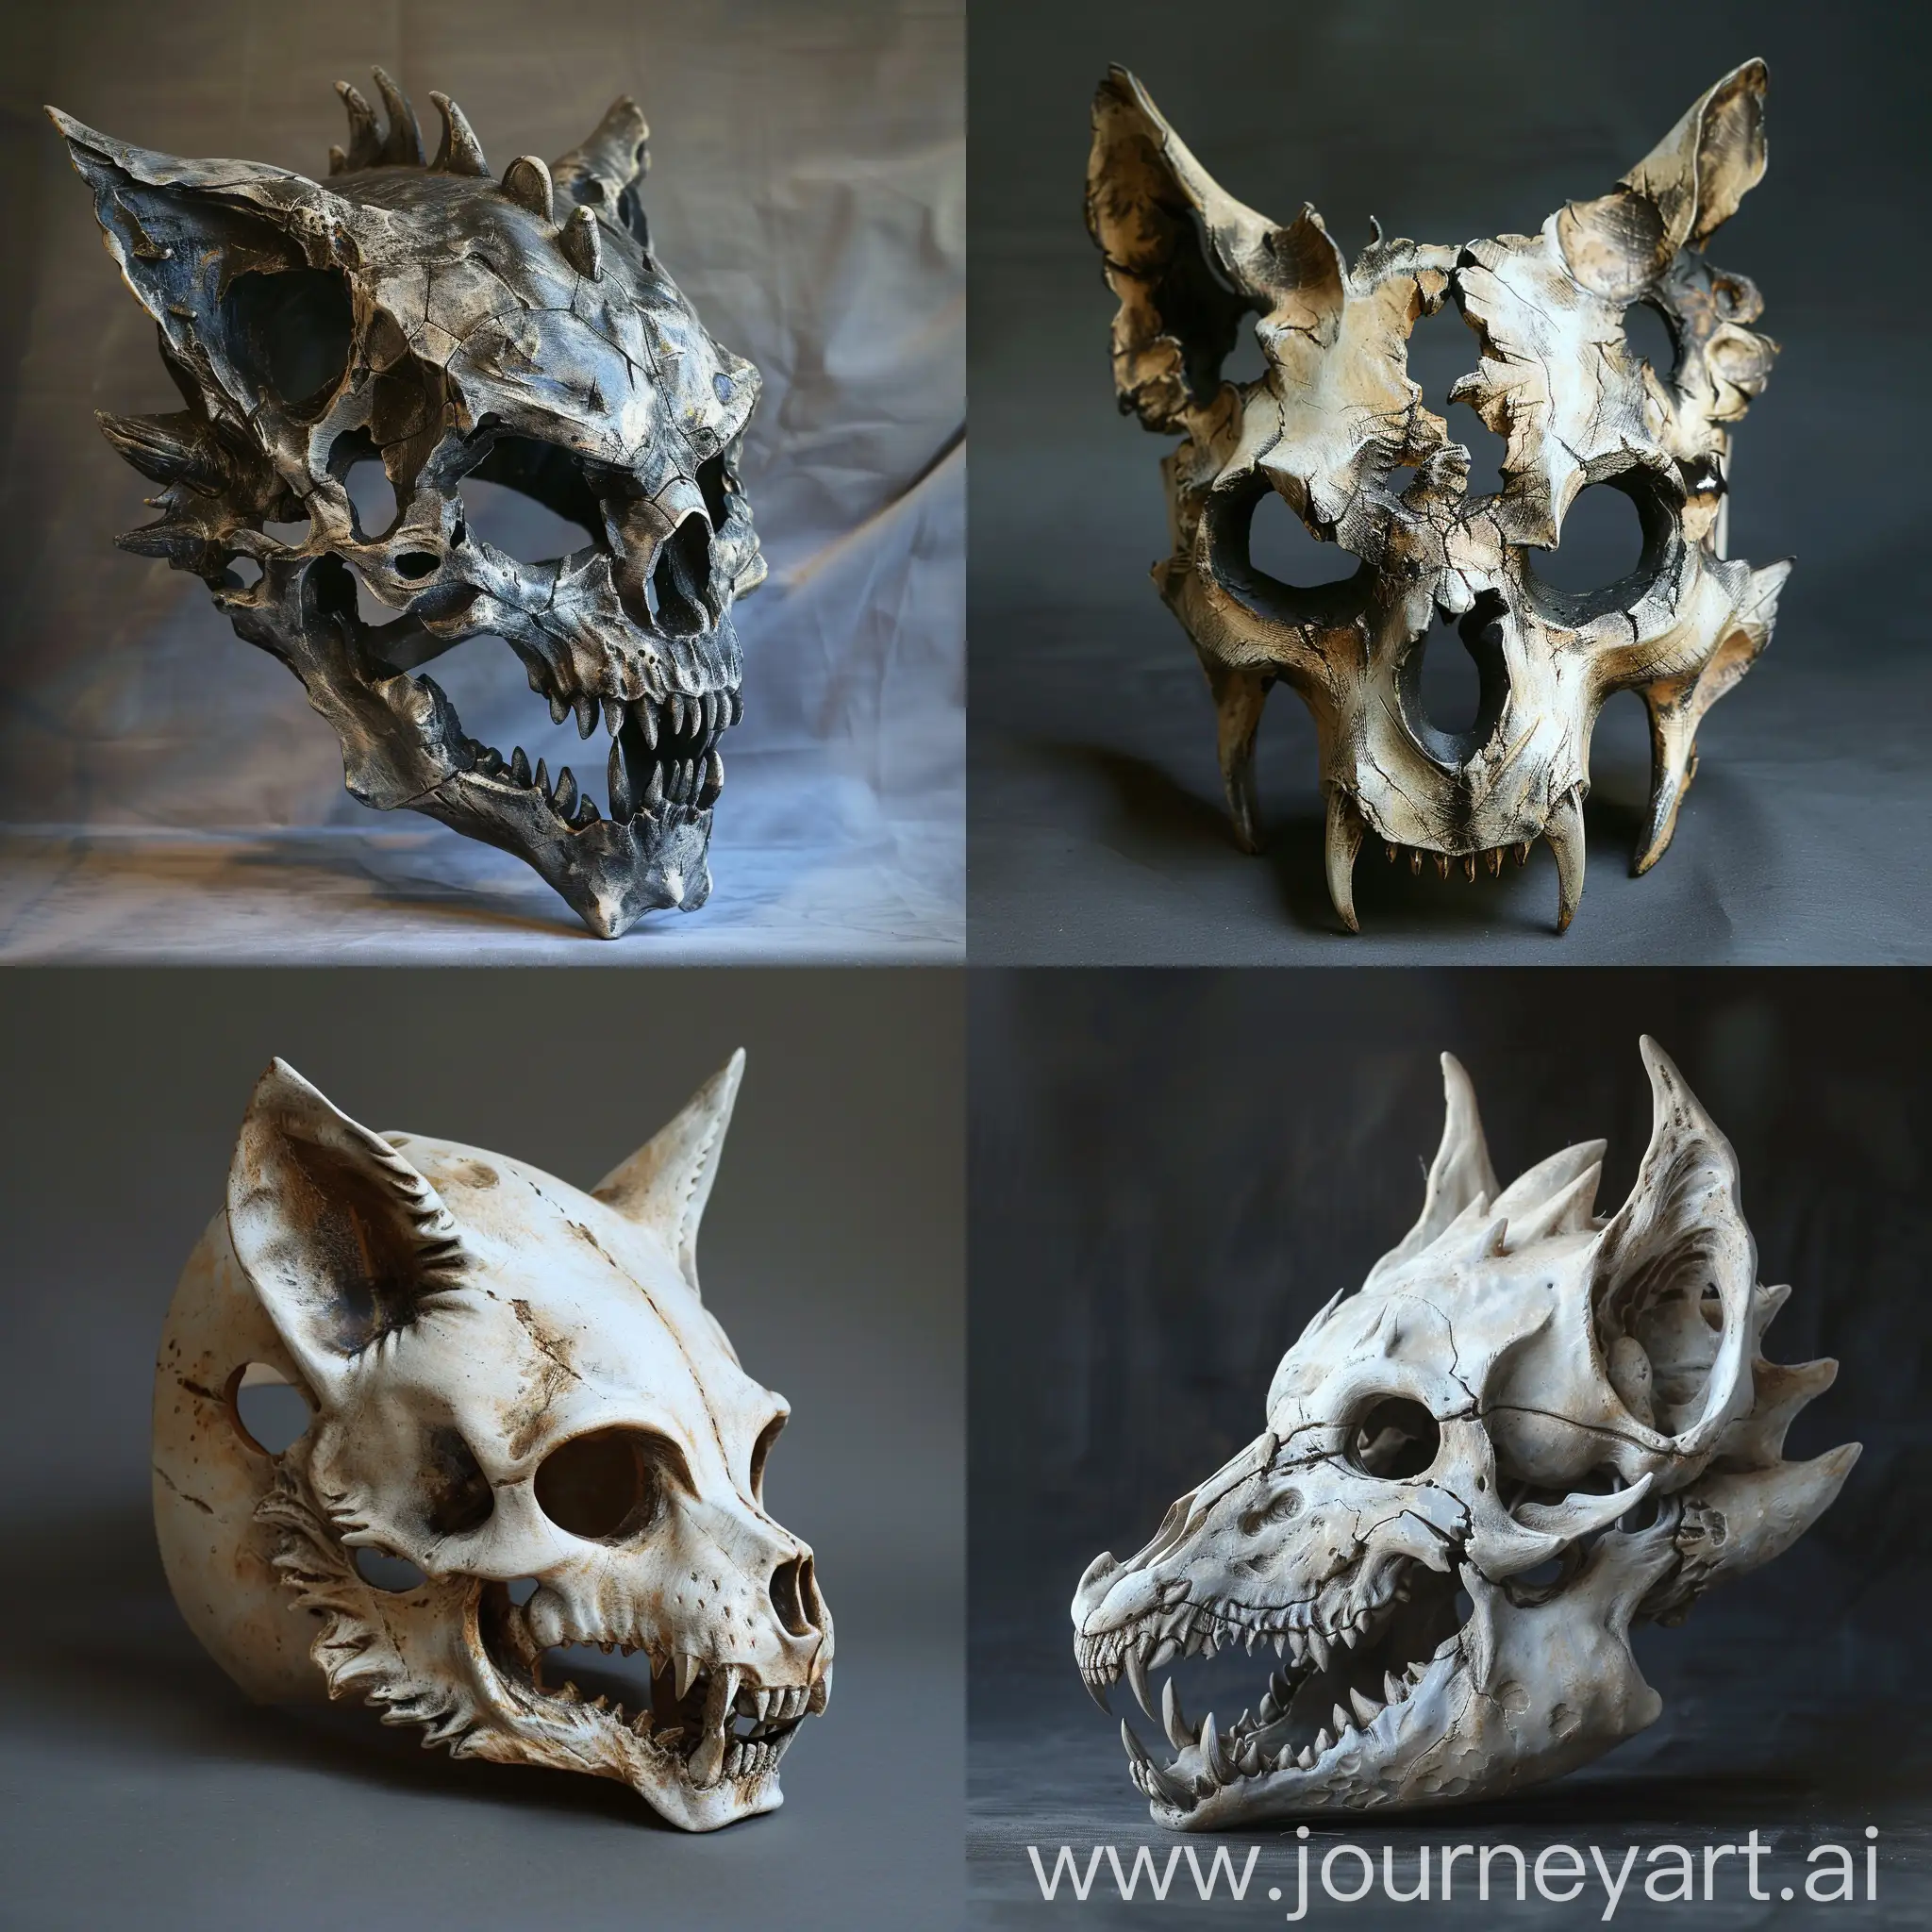 a mask in a form of wolf's skull